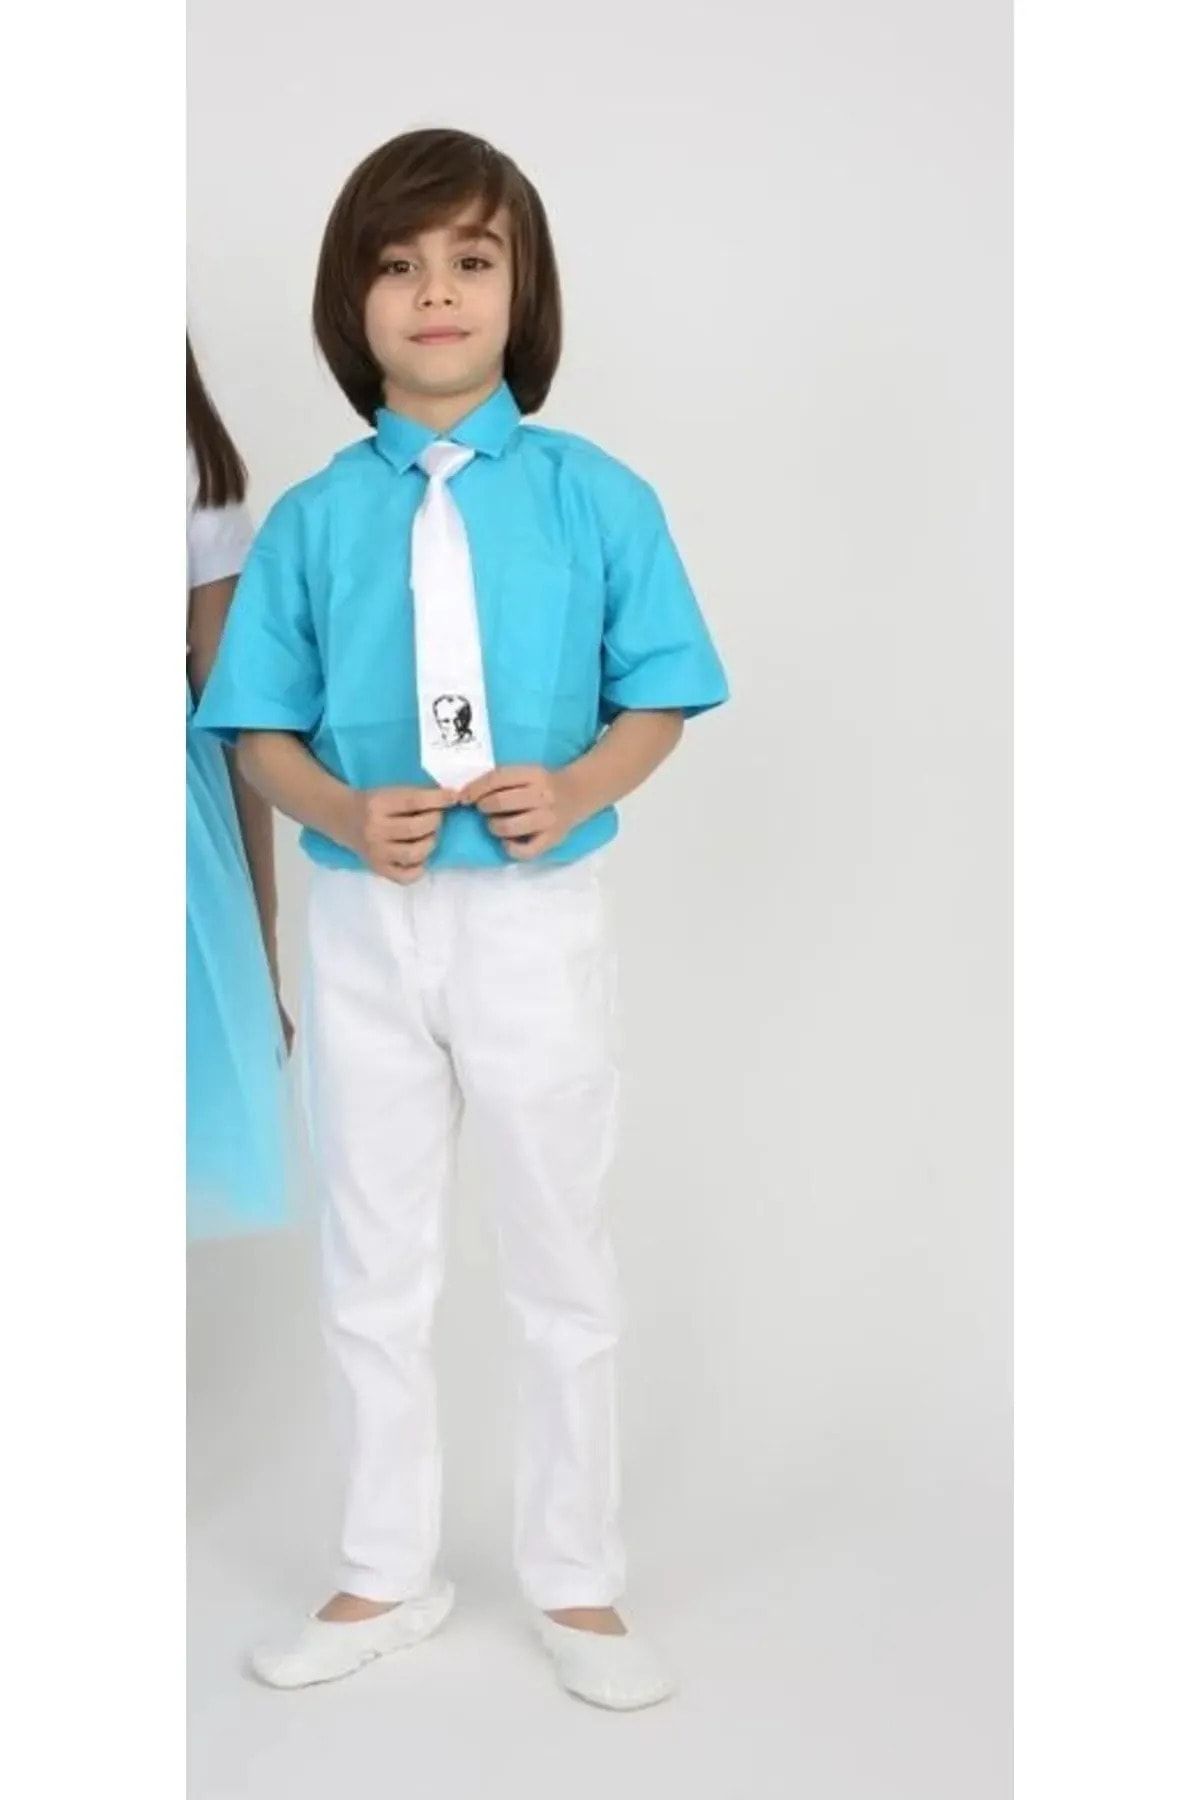 NOBLE STORE Boy's Classic Dacron Shirt 23 April 19 May 29 October  Performance Clothing - Trendyol